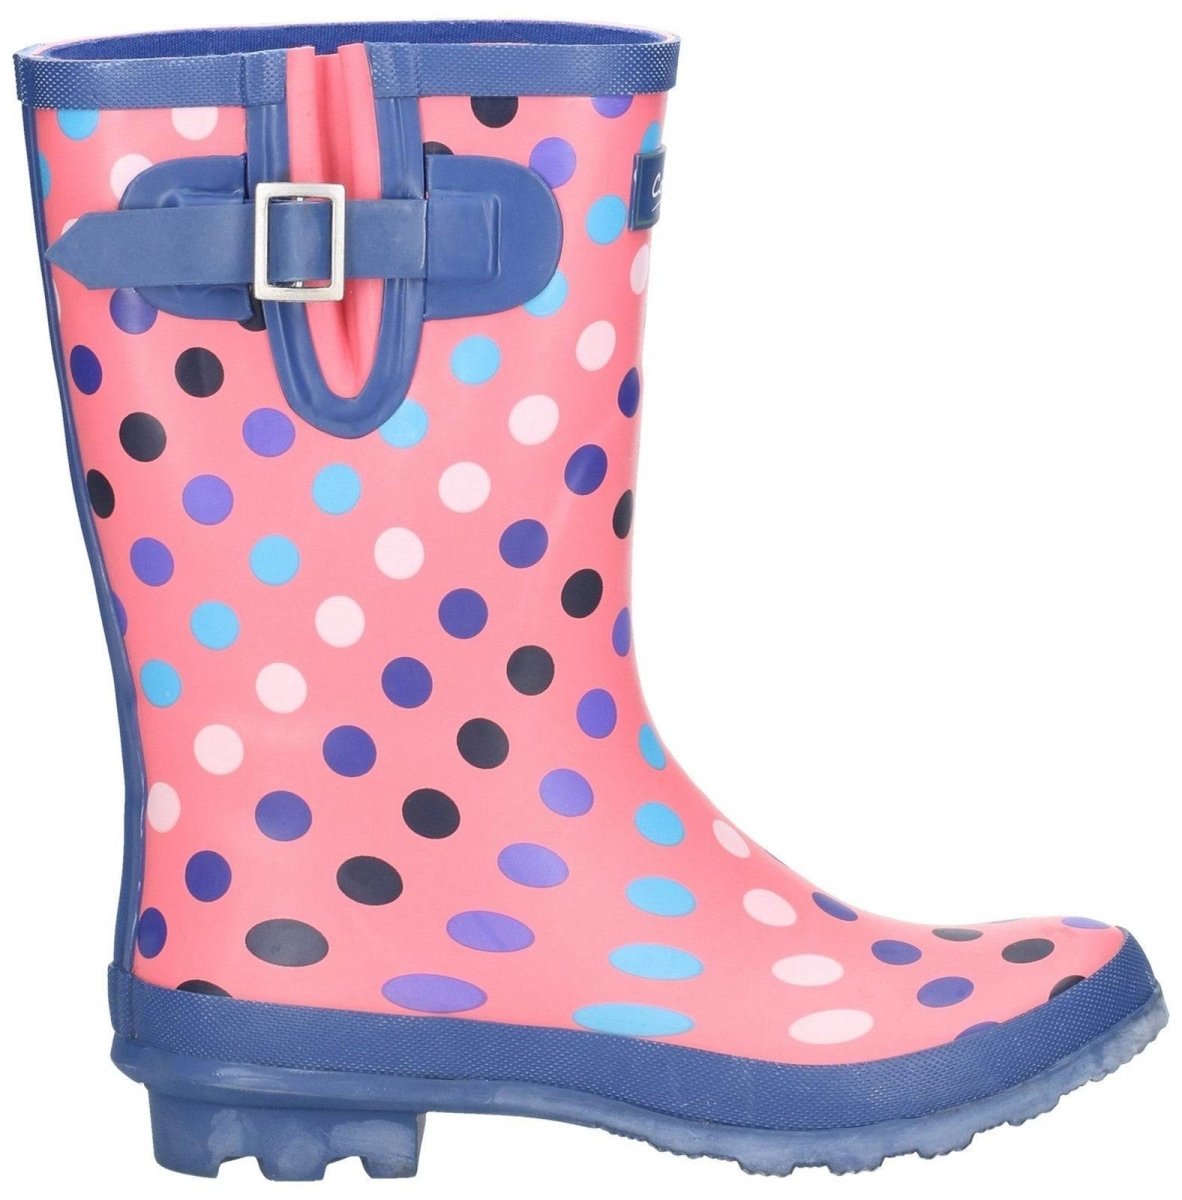 Cotswold Paxford Mid Calf Ladies Wellington Boots - Shoe Store Direct